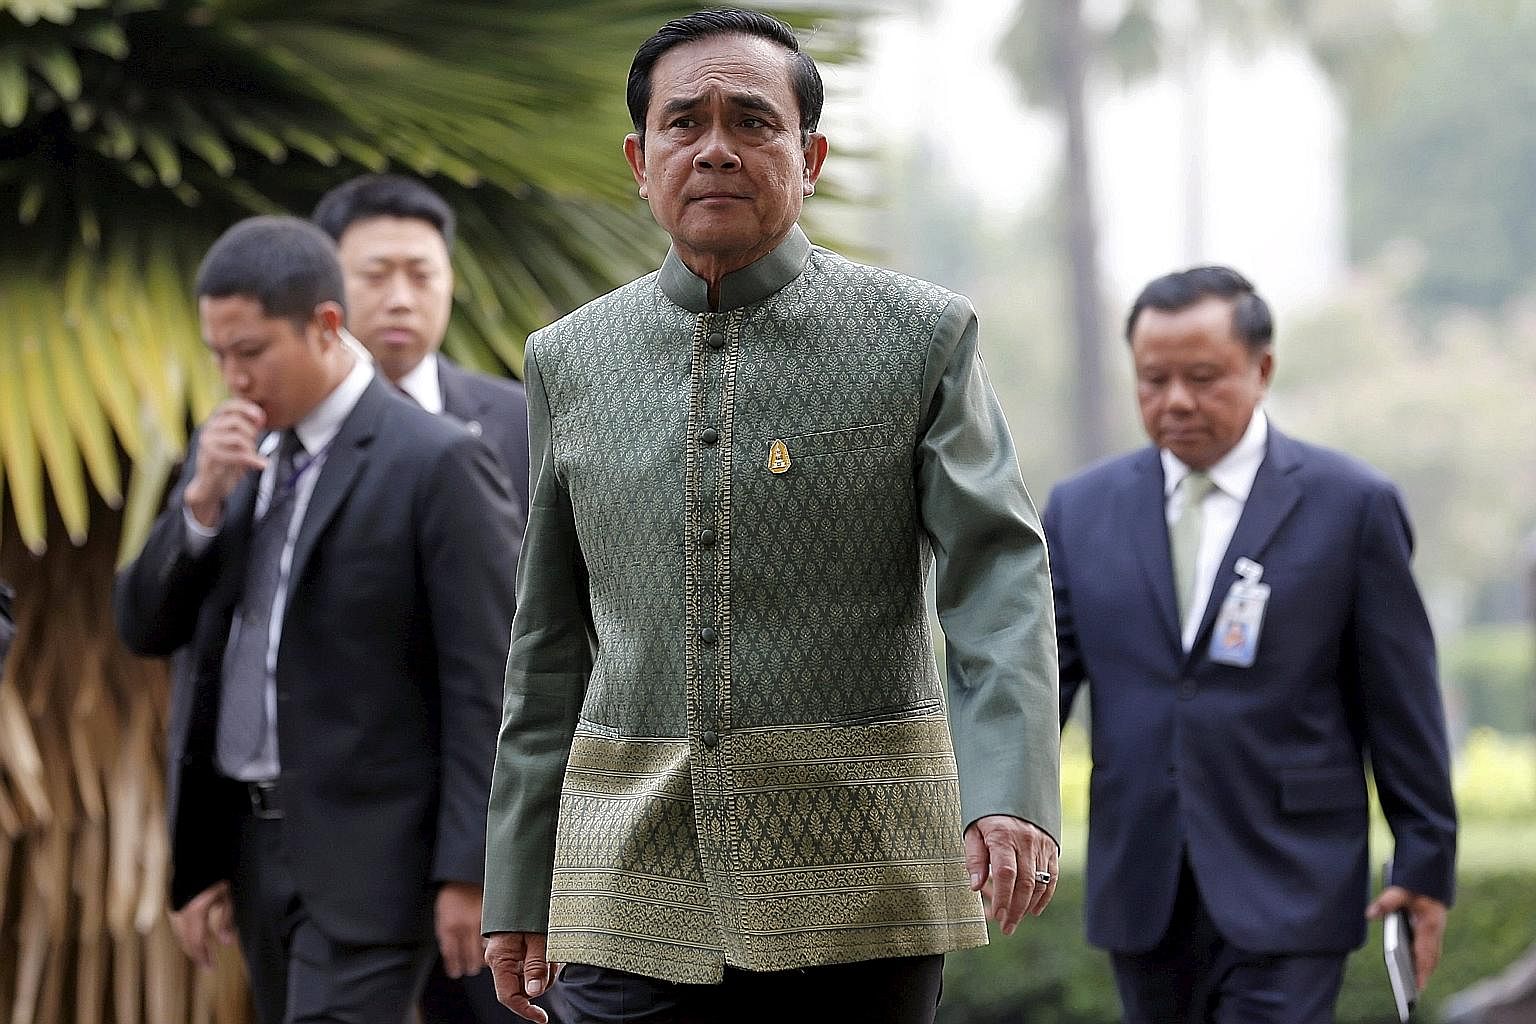 Thailand's Prime Minister Prayut Chan-o-cha arriving for a Cabinet meeting at Government House in Bangkok this week. While analysts say Thailand's generals are in no hurry to hand over power, the lower-than-expected economic growth of about 2.8 per c